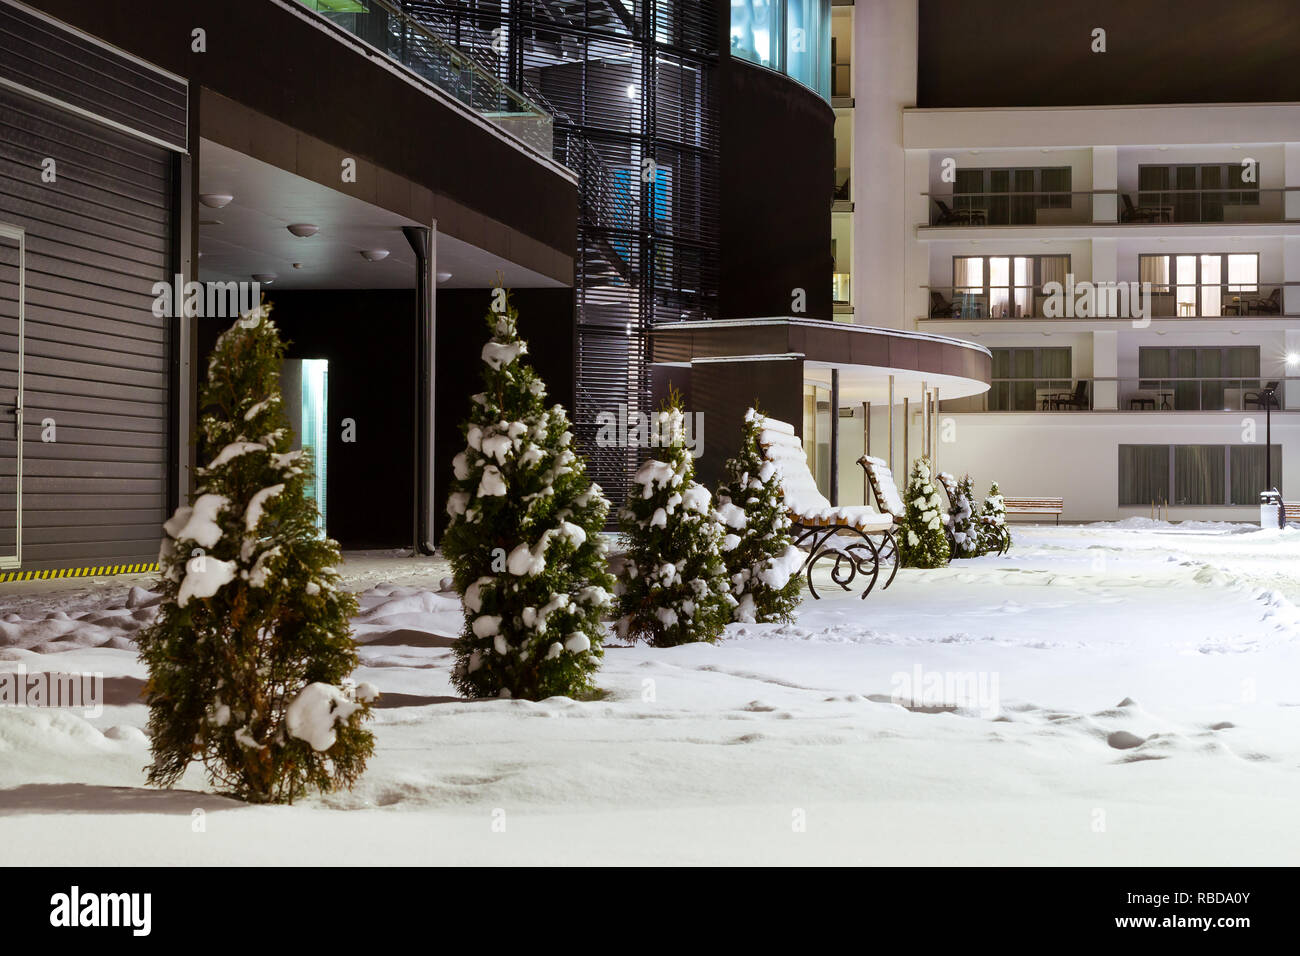 Modern building made of glass and concrete amidst snowy winter landscape at night. Severe Northern winter and snowy weather. Snow-covered wooden benches. Narva-Joesuu Stock Photo